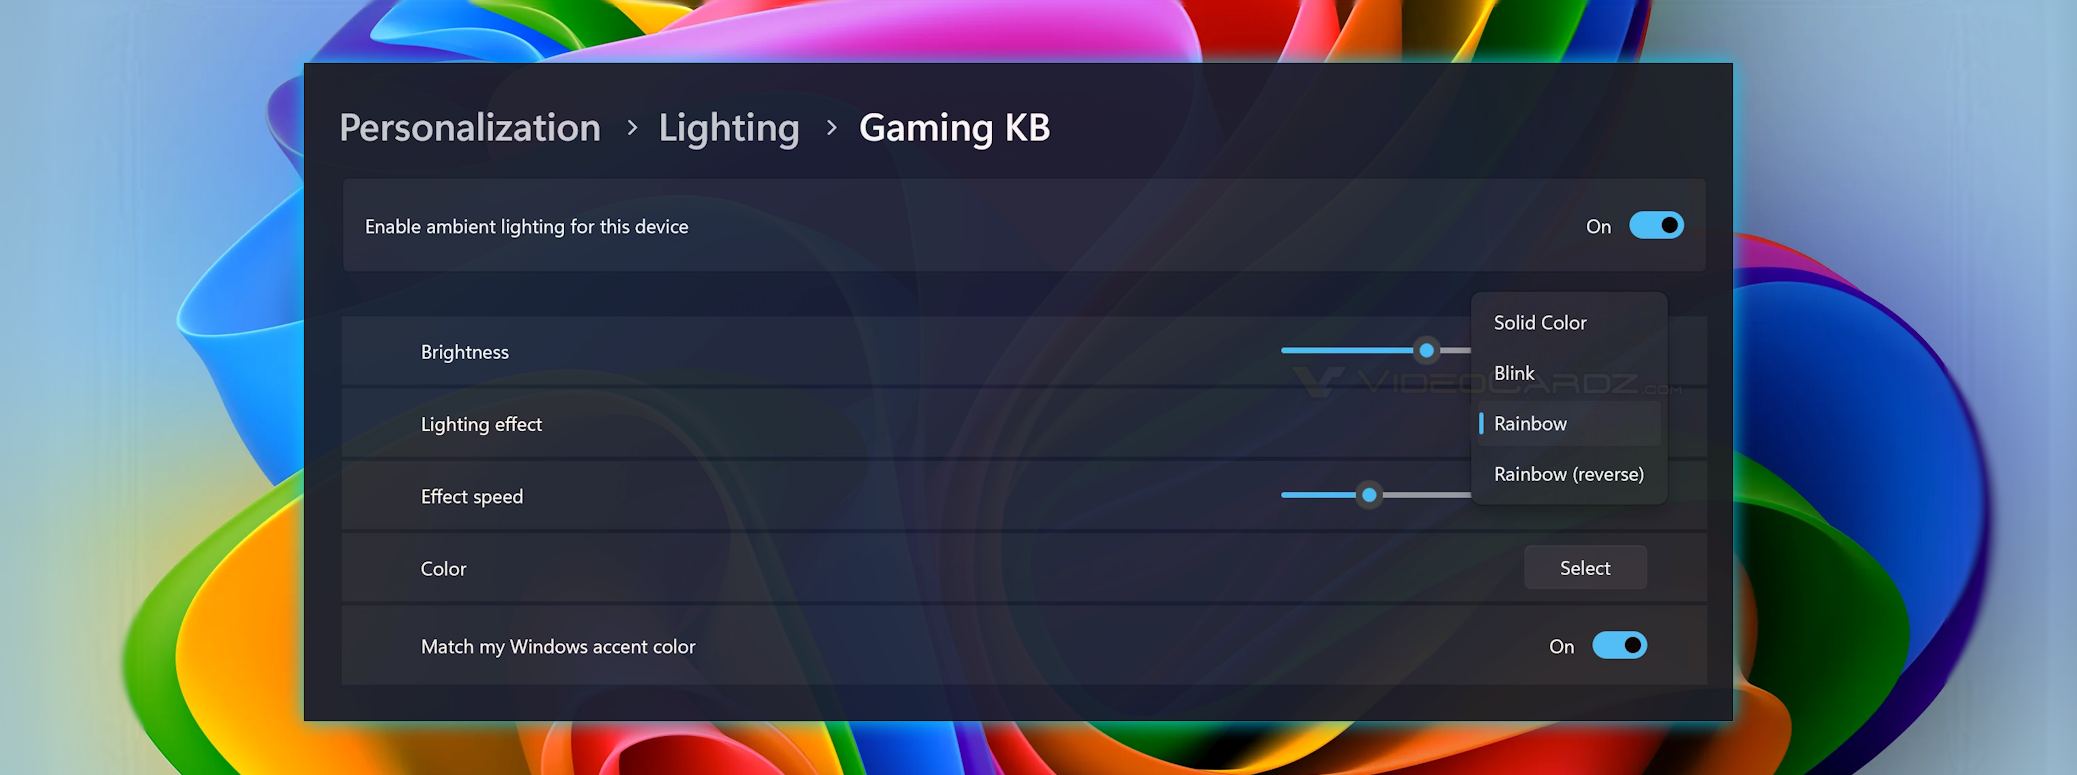 Windows 11 will let you control RGB LED lighting